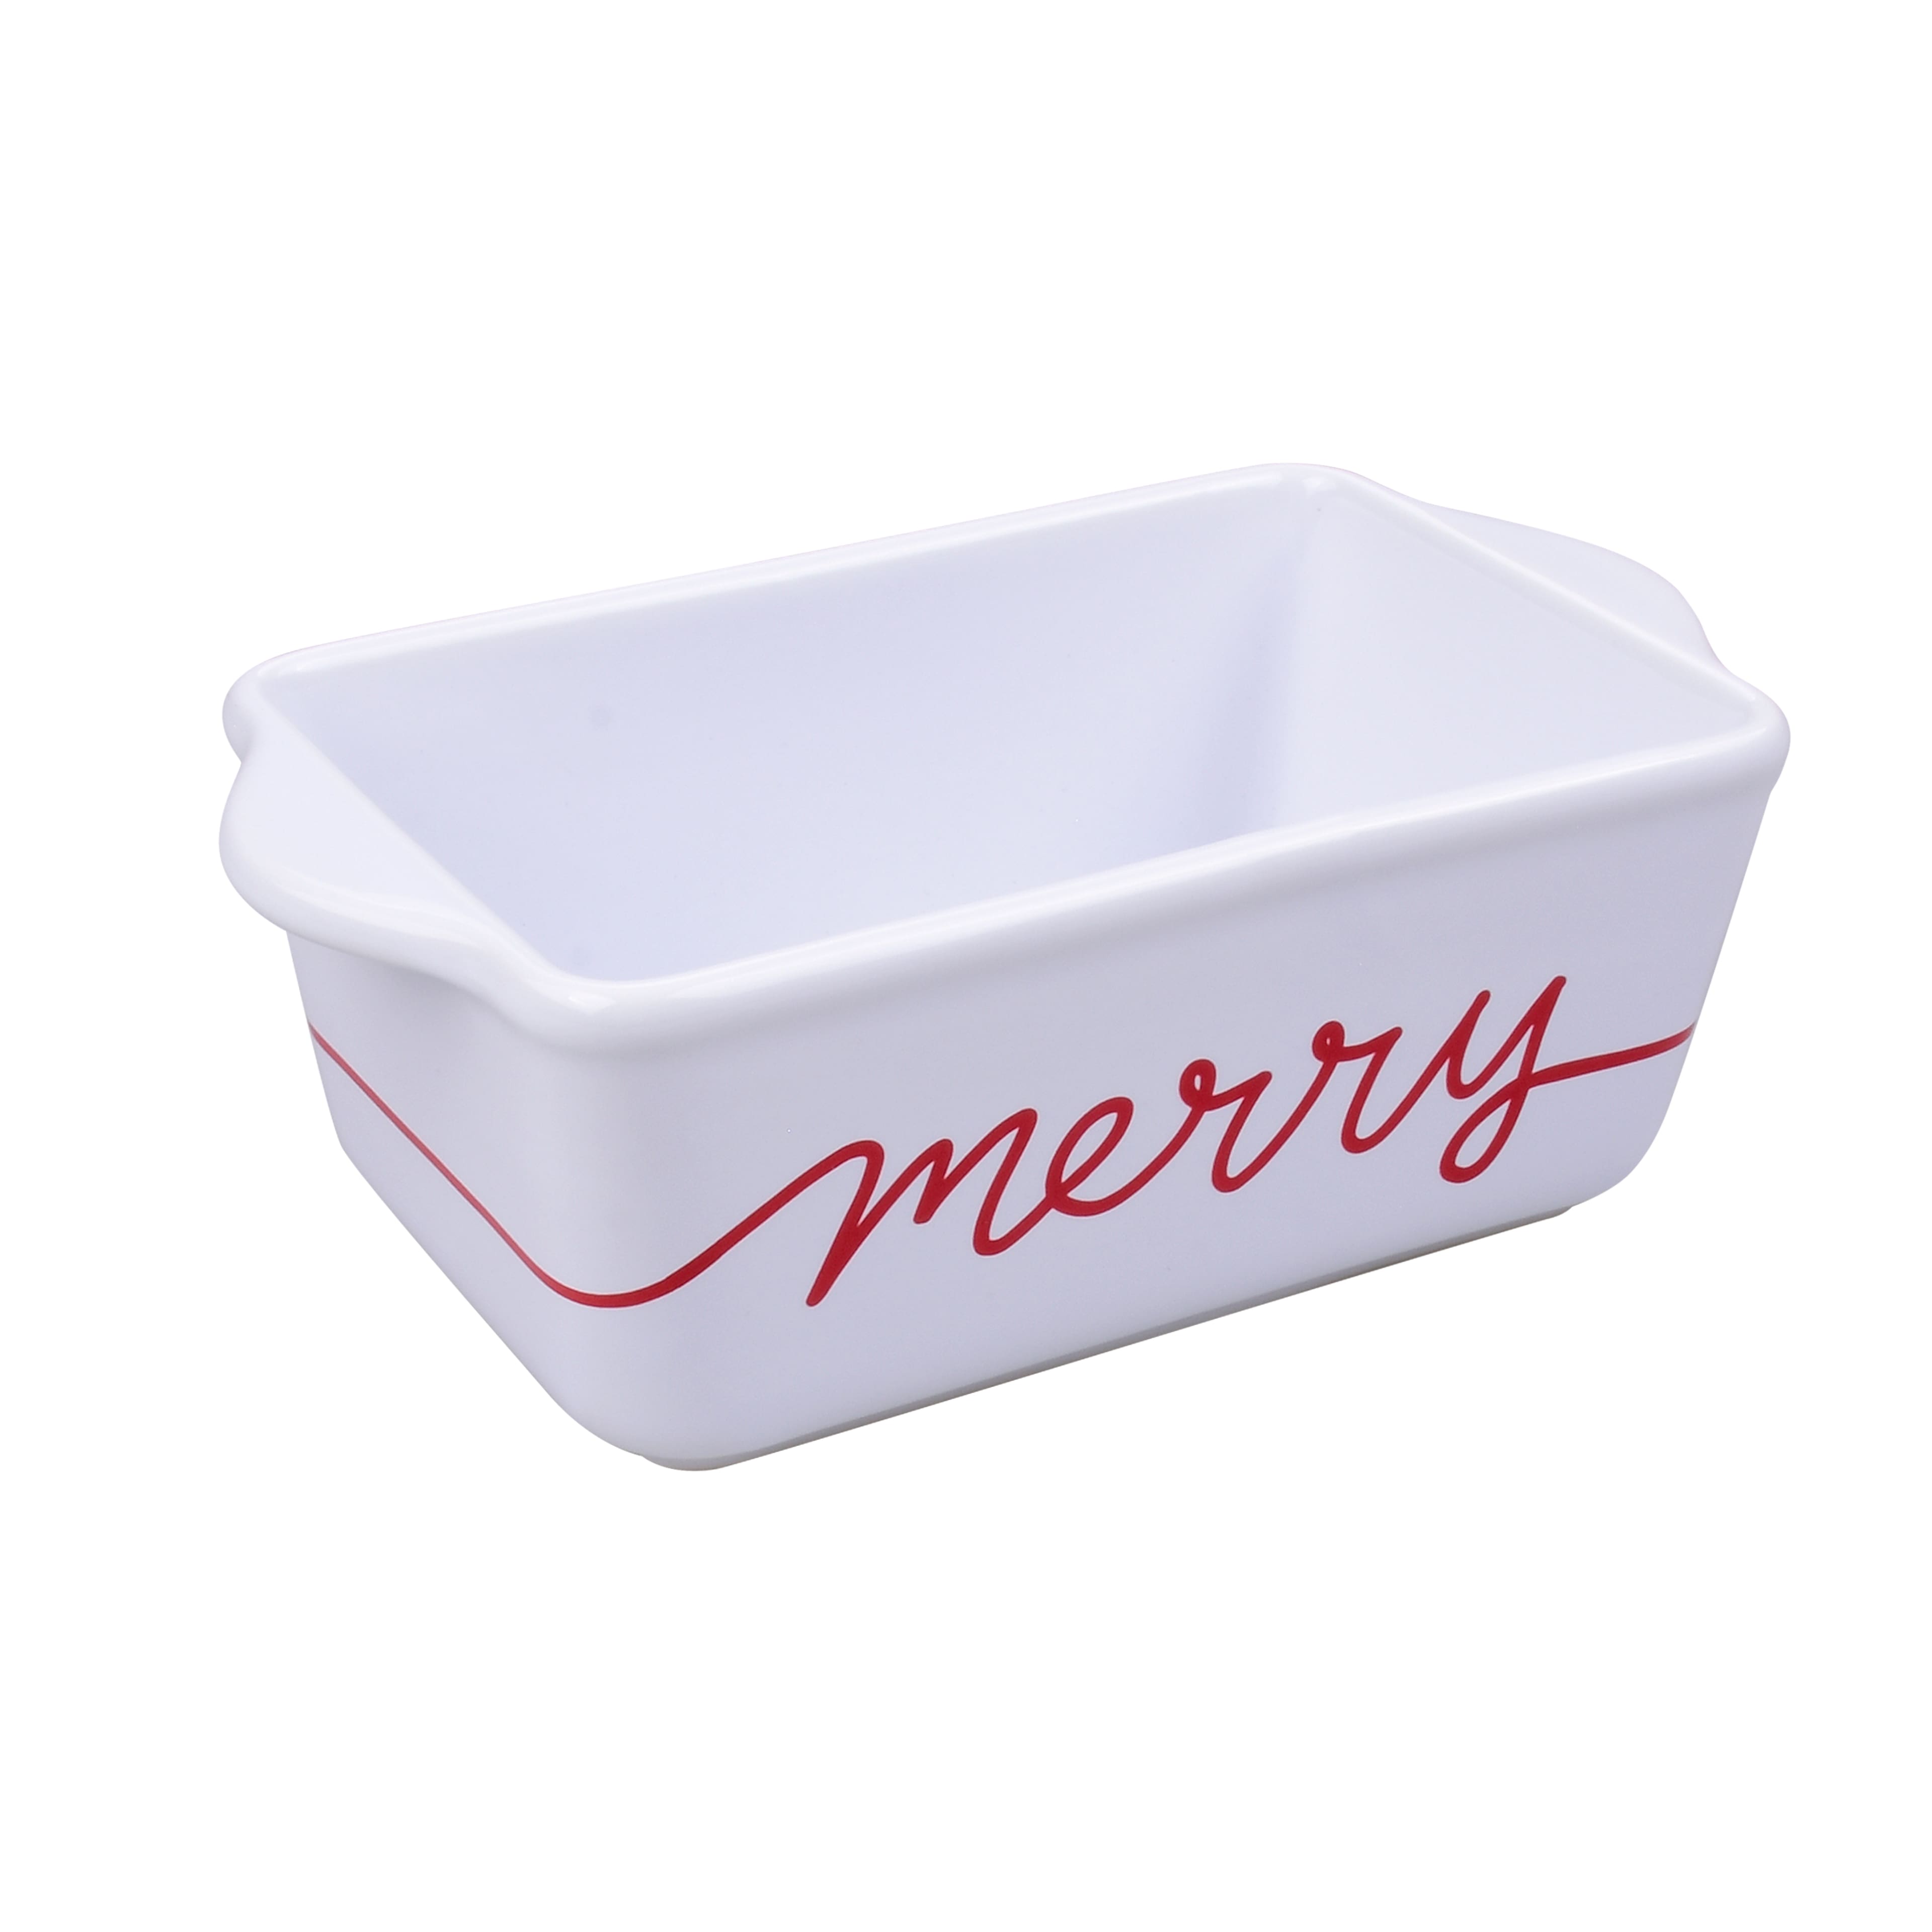 Vintage LTD Commodities White Ceramic Mini Loaf Baking Pan in Christmas  Theme. Set of 2 Mini Loaf Pans -  Finland